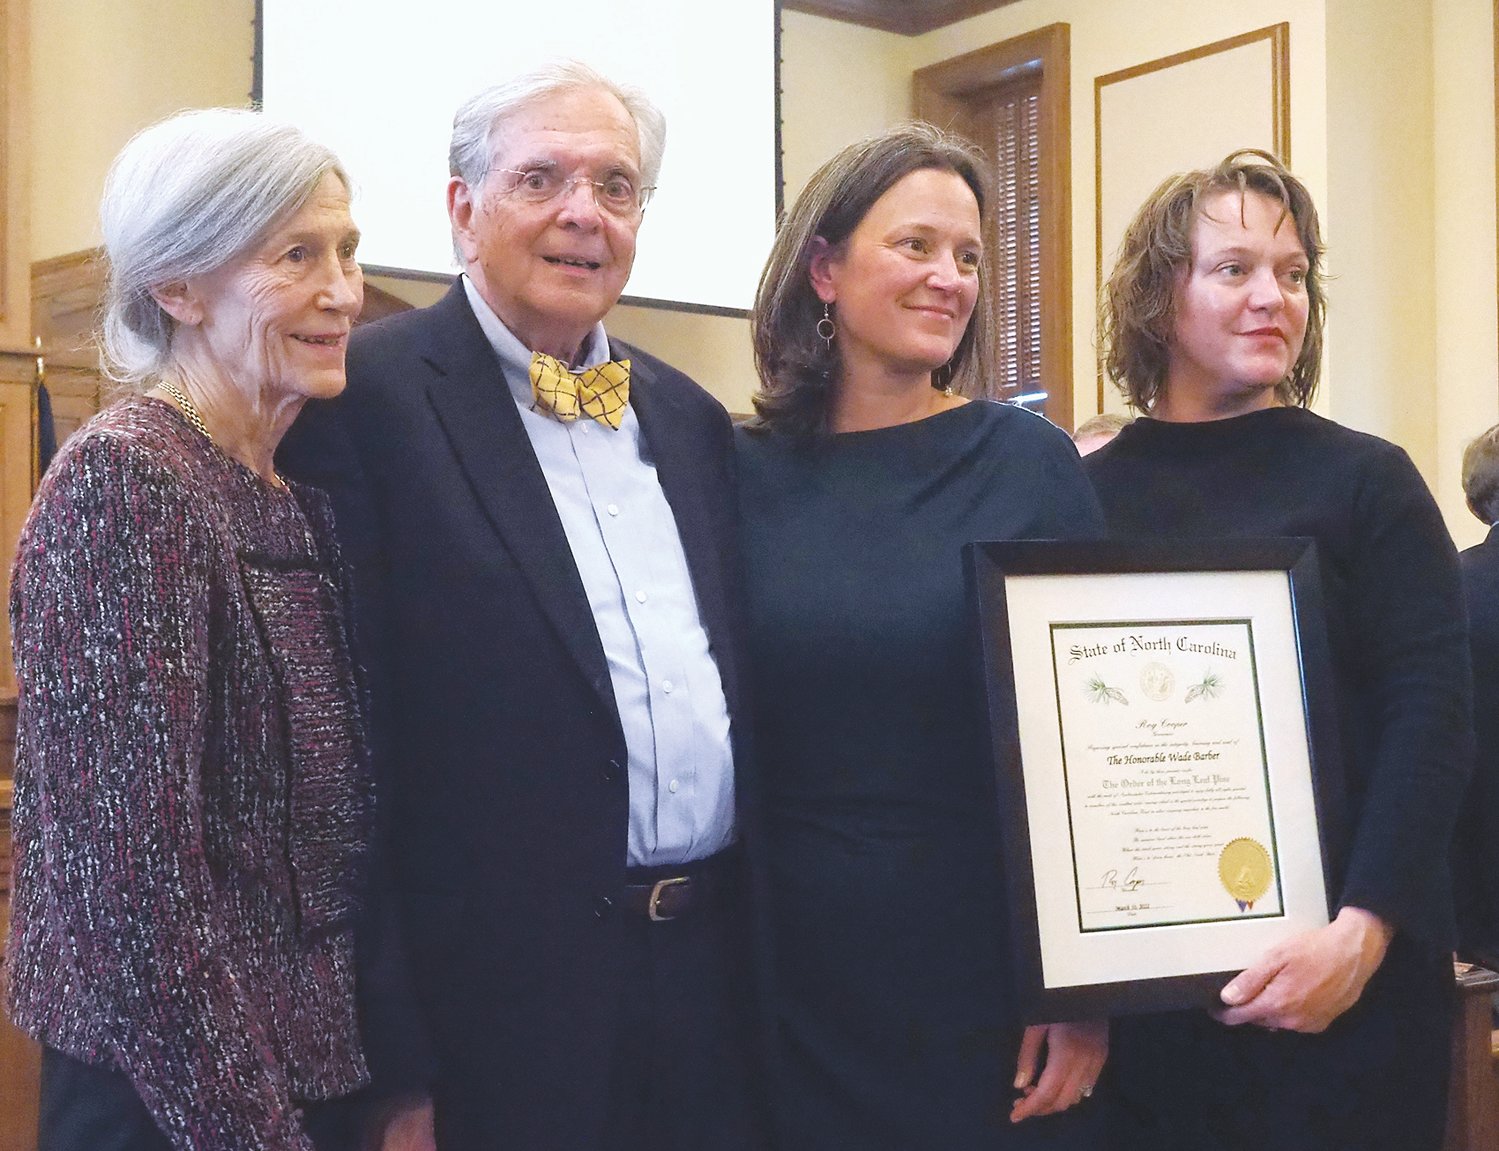 Wade Barber, shown here with family members after receiving the Order of the Long Leaf Pine in March, died Friday at the age of 78.